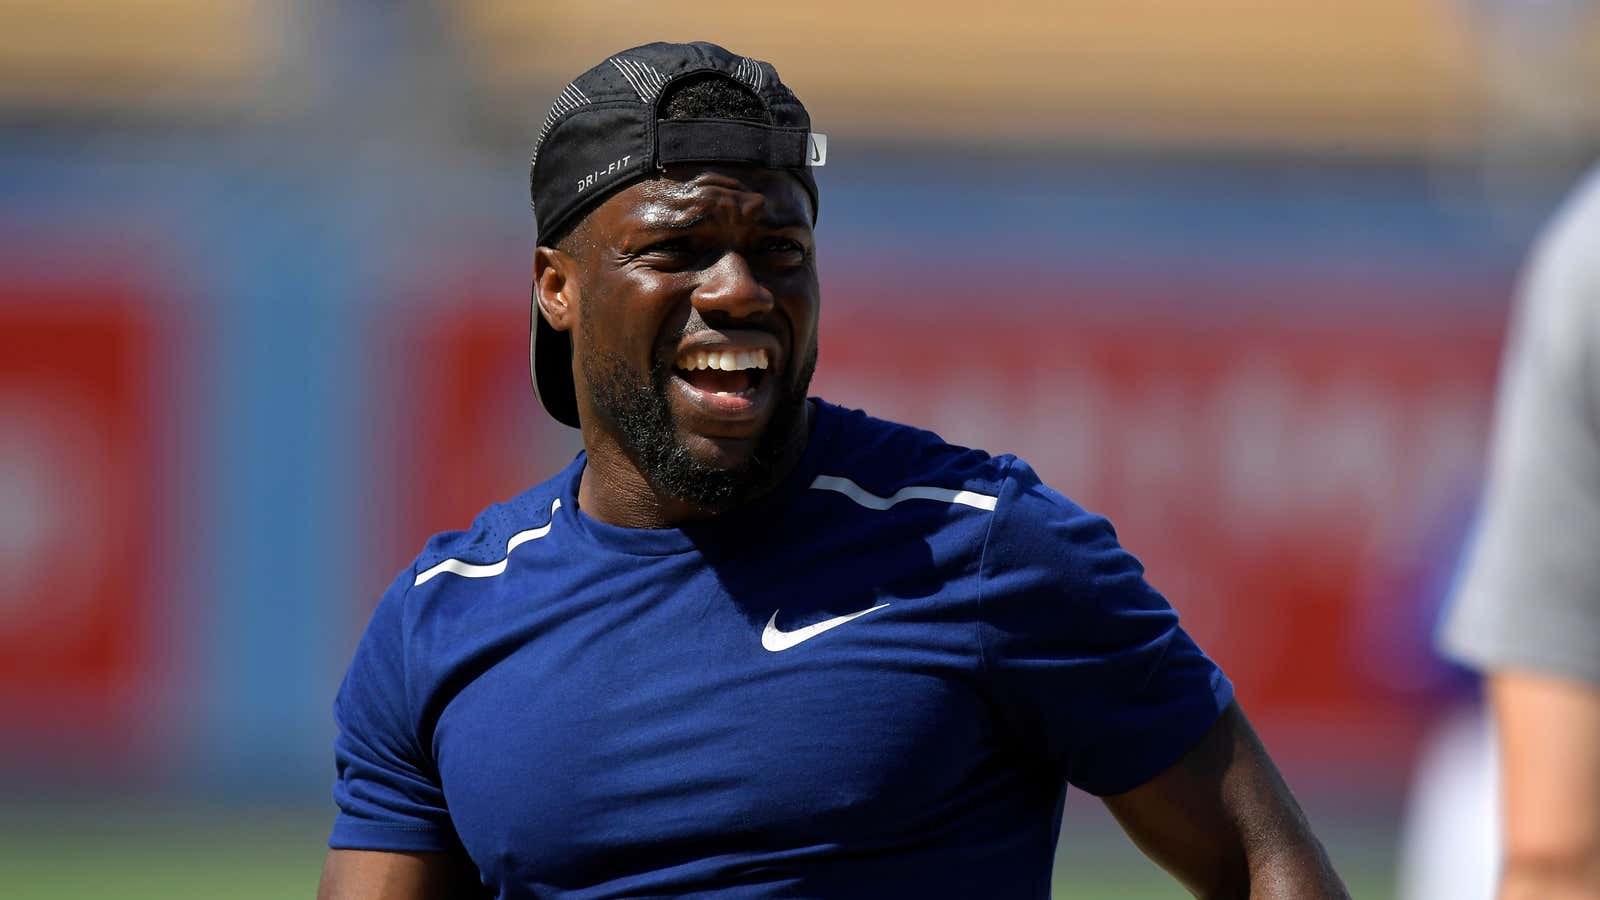 Comedian, actor, fitness enthusiast and Nike athlete Kevin Hart.